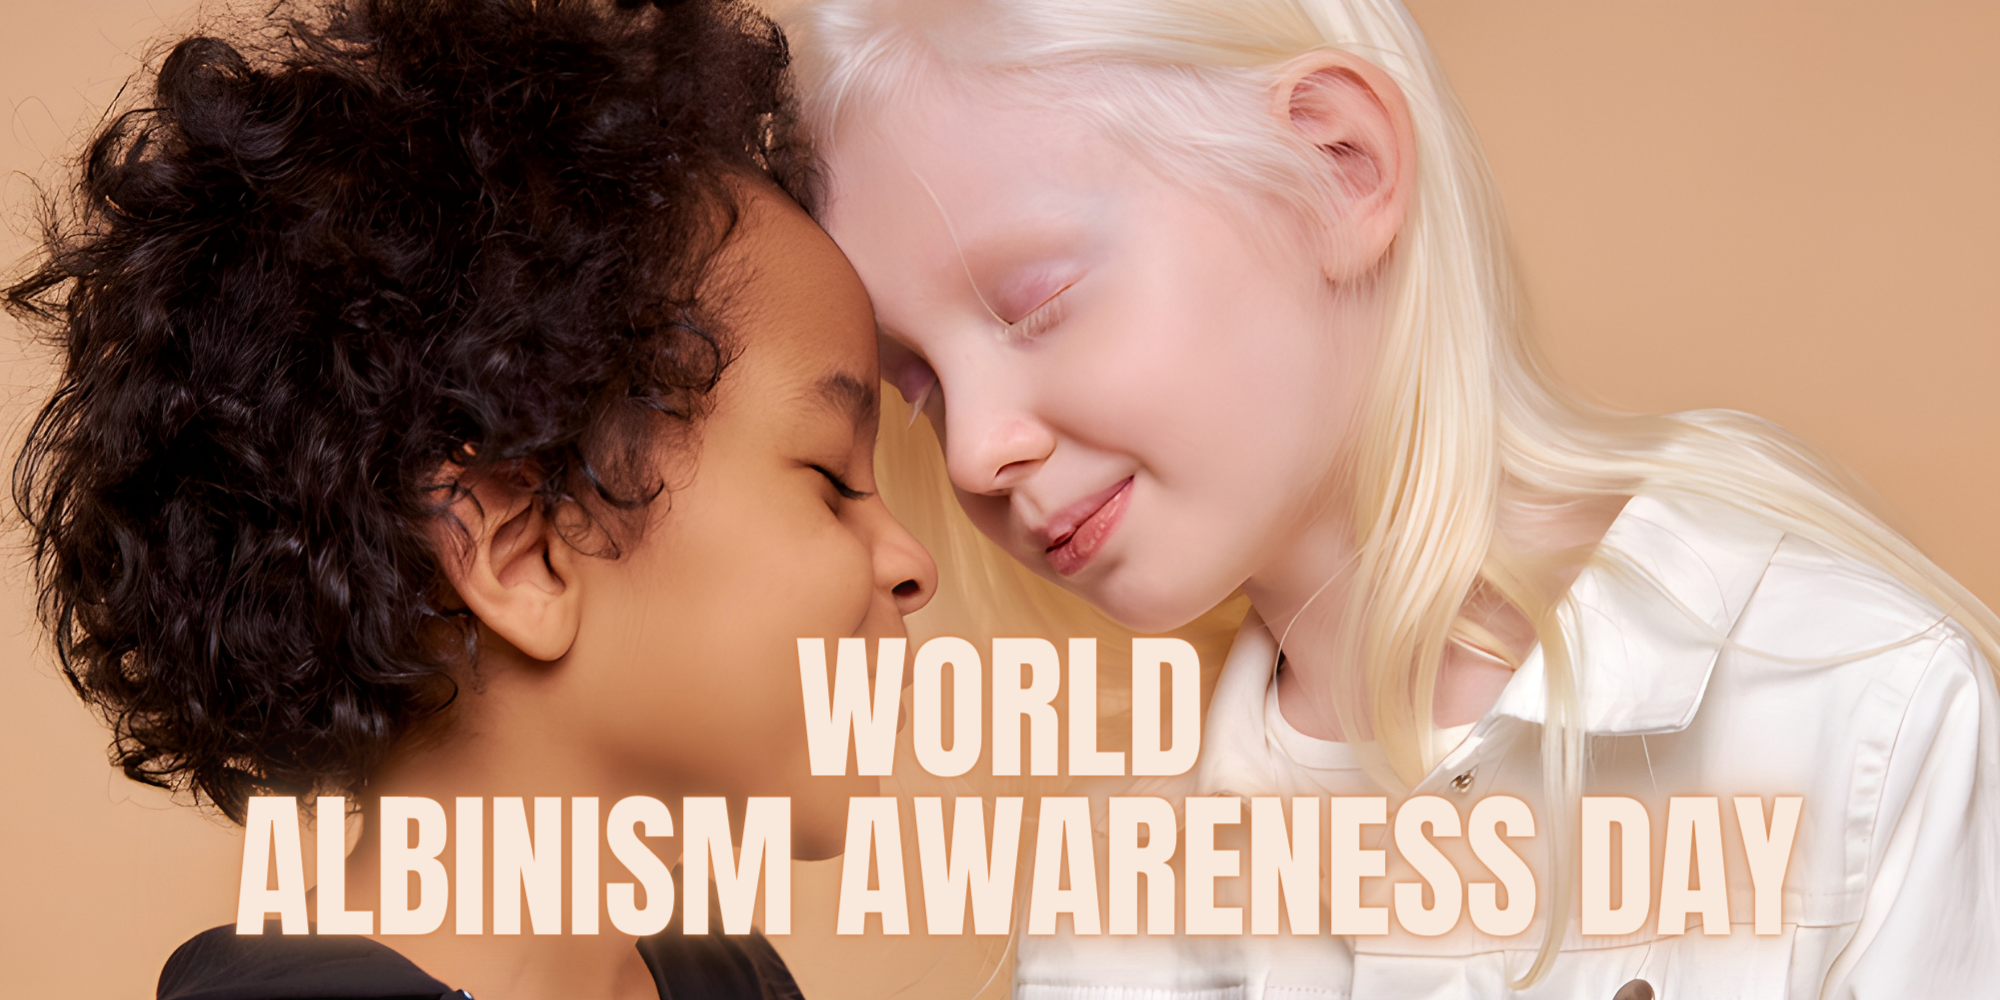 Shining a Light on Albinism: World Albinism Awareness Day